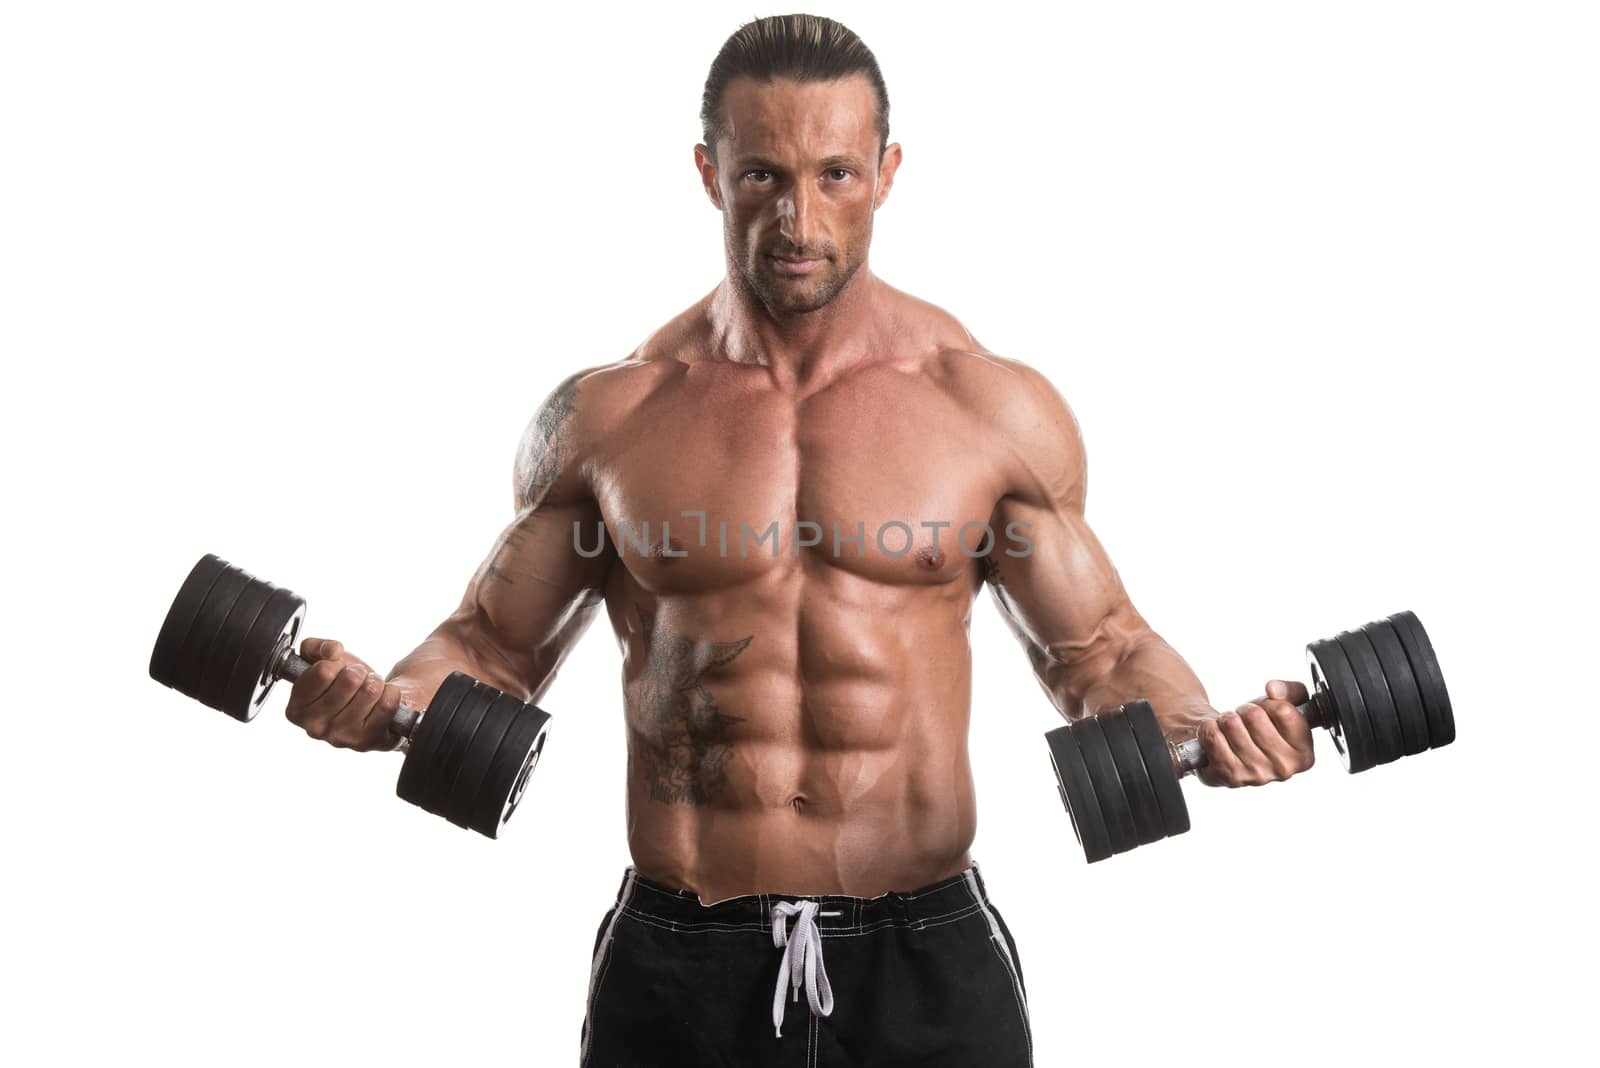 Man Working Out With Dumbbells On White Background by JalePhoto